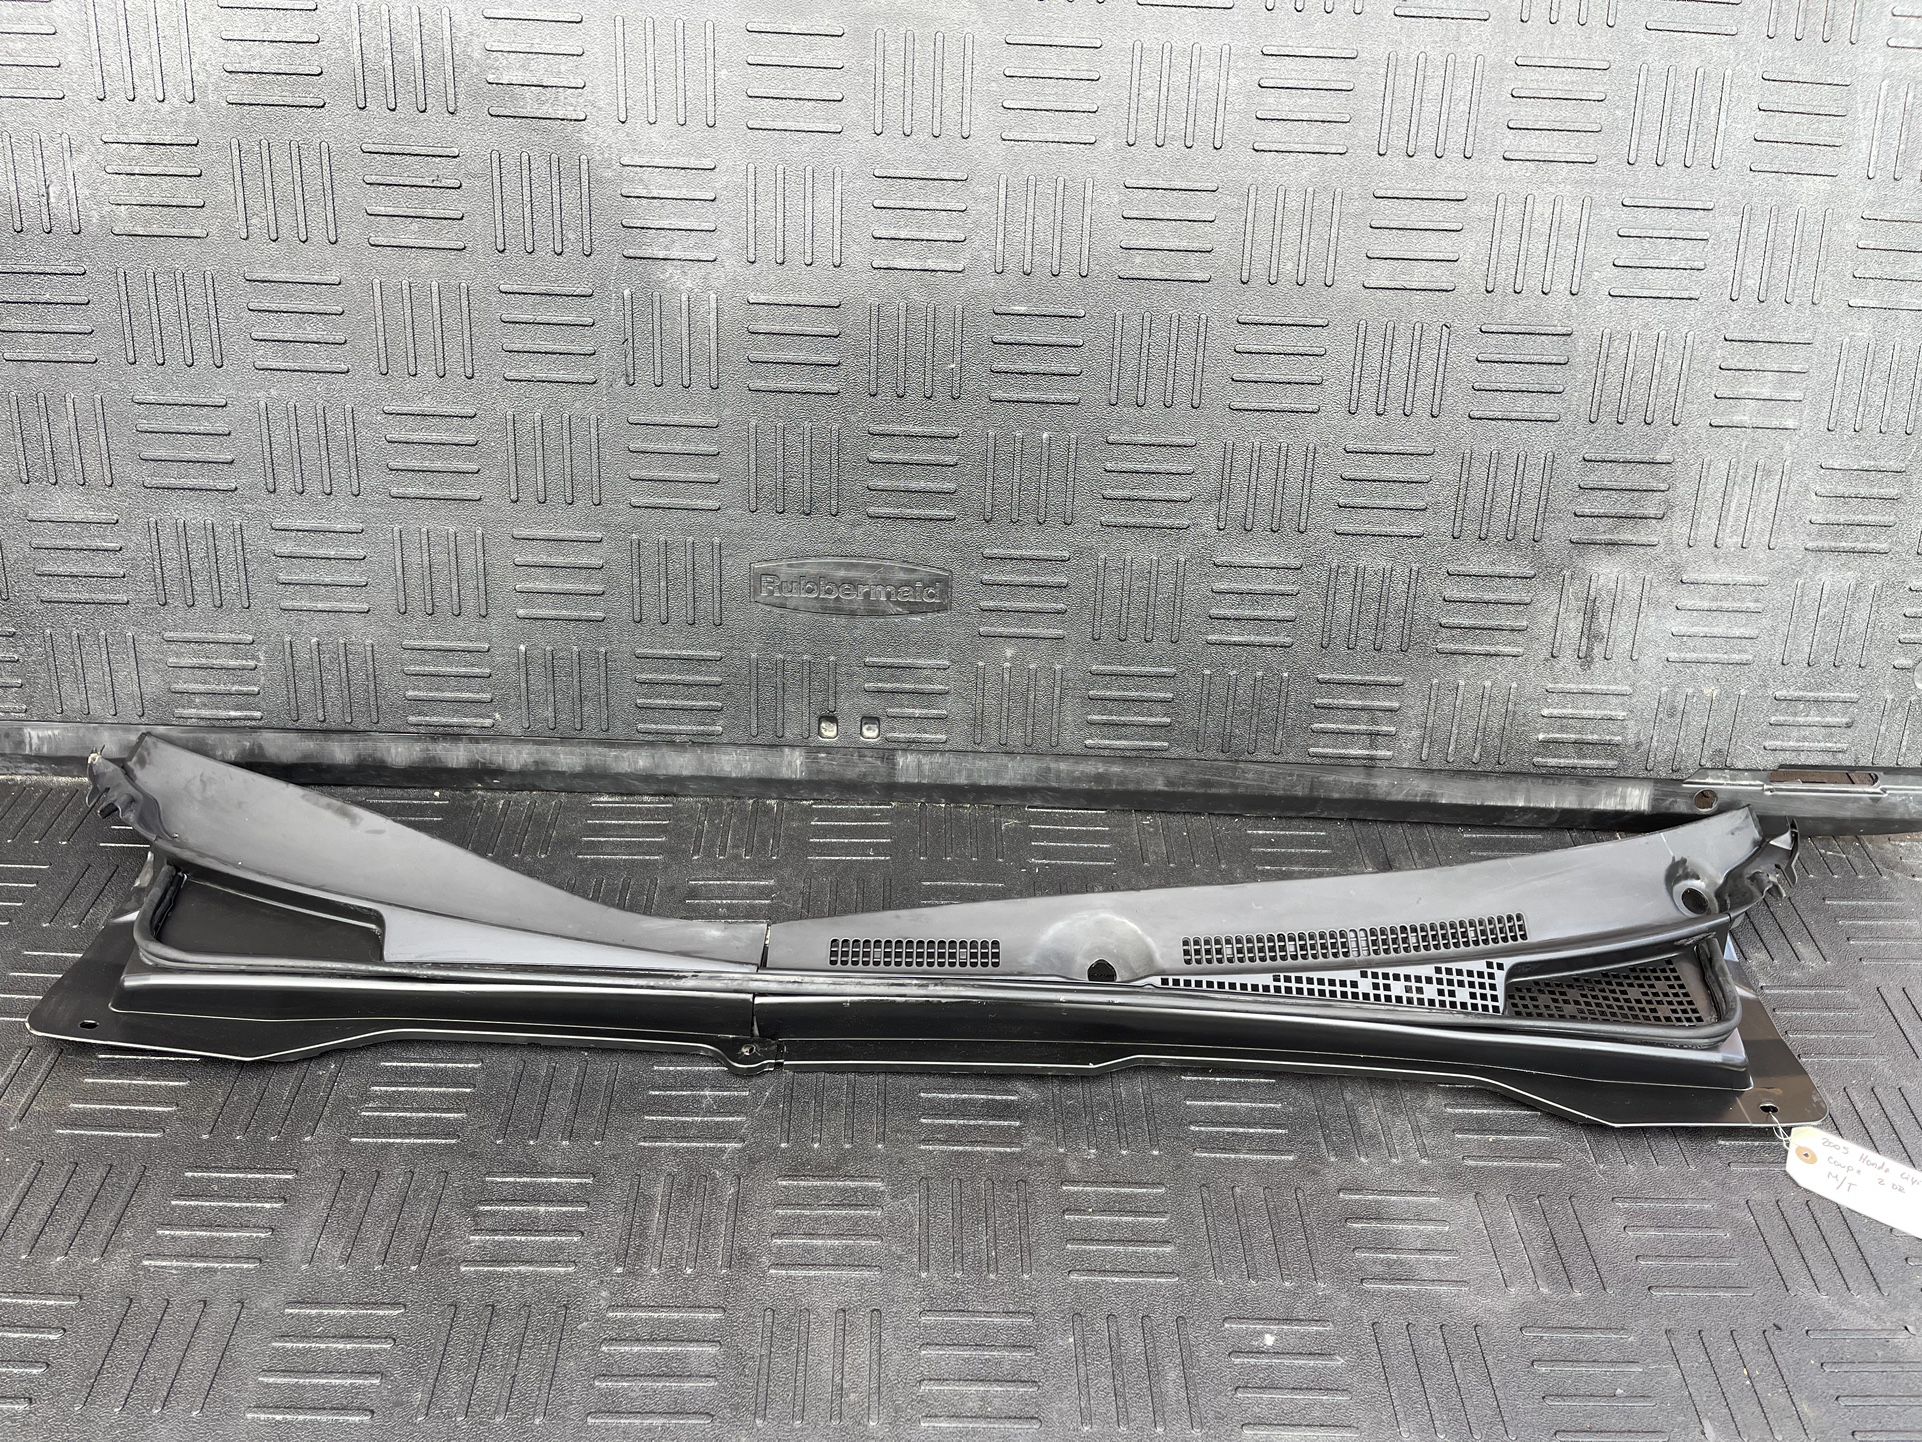  2005 HONDA CIVIC Coupe FRONT WINDSHIELD TOP COWL VENT PANEL GRILLE TRIM